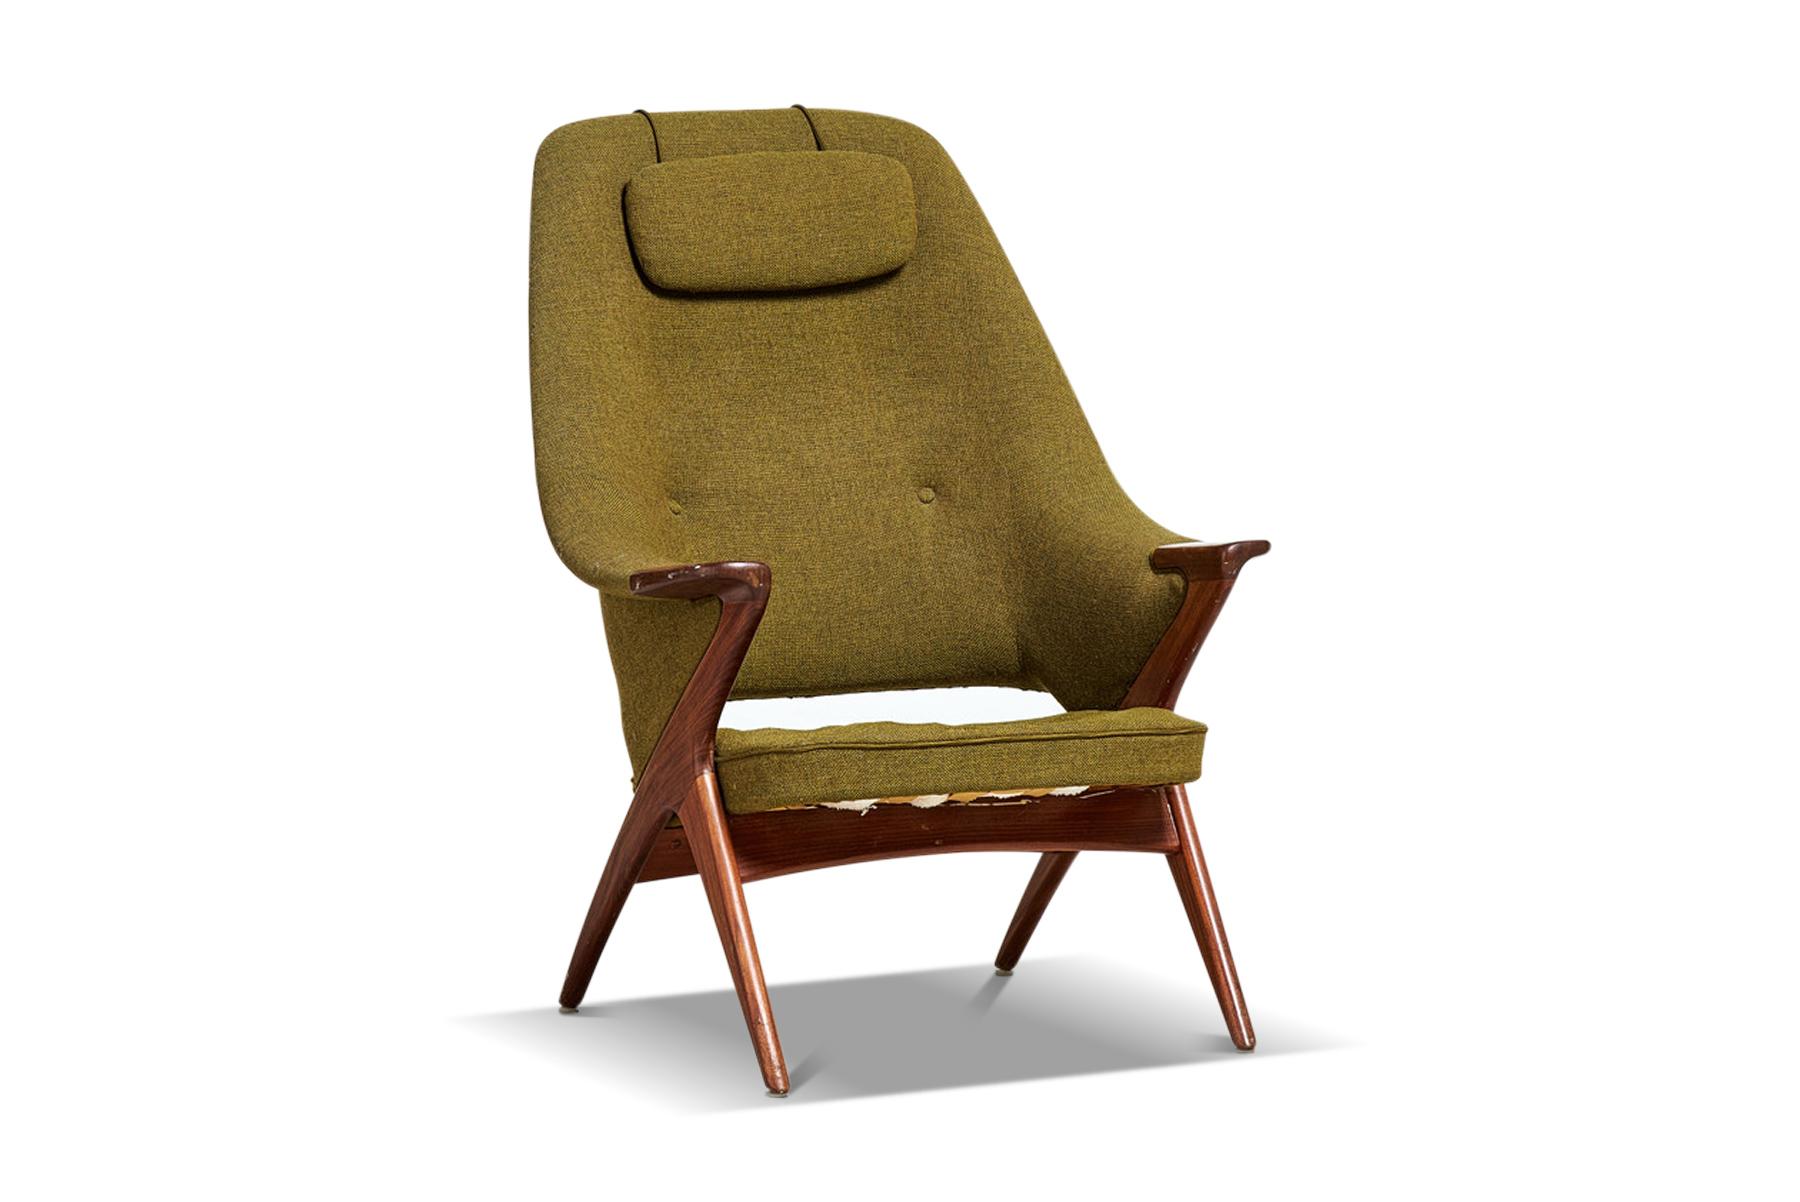 20th Century Nordic Modern Bravo Lounge Chair By Sigurd Resell